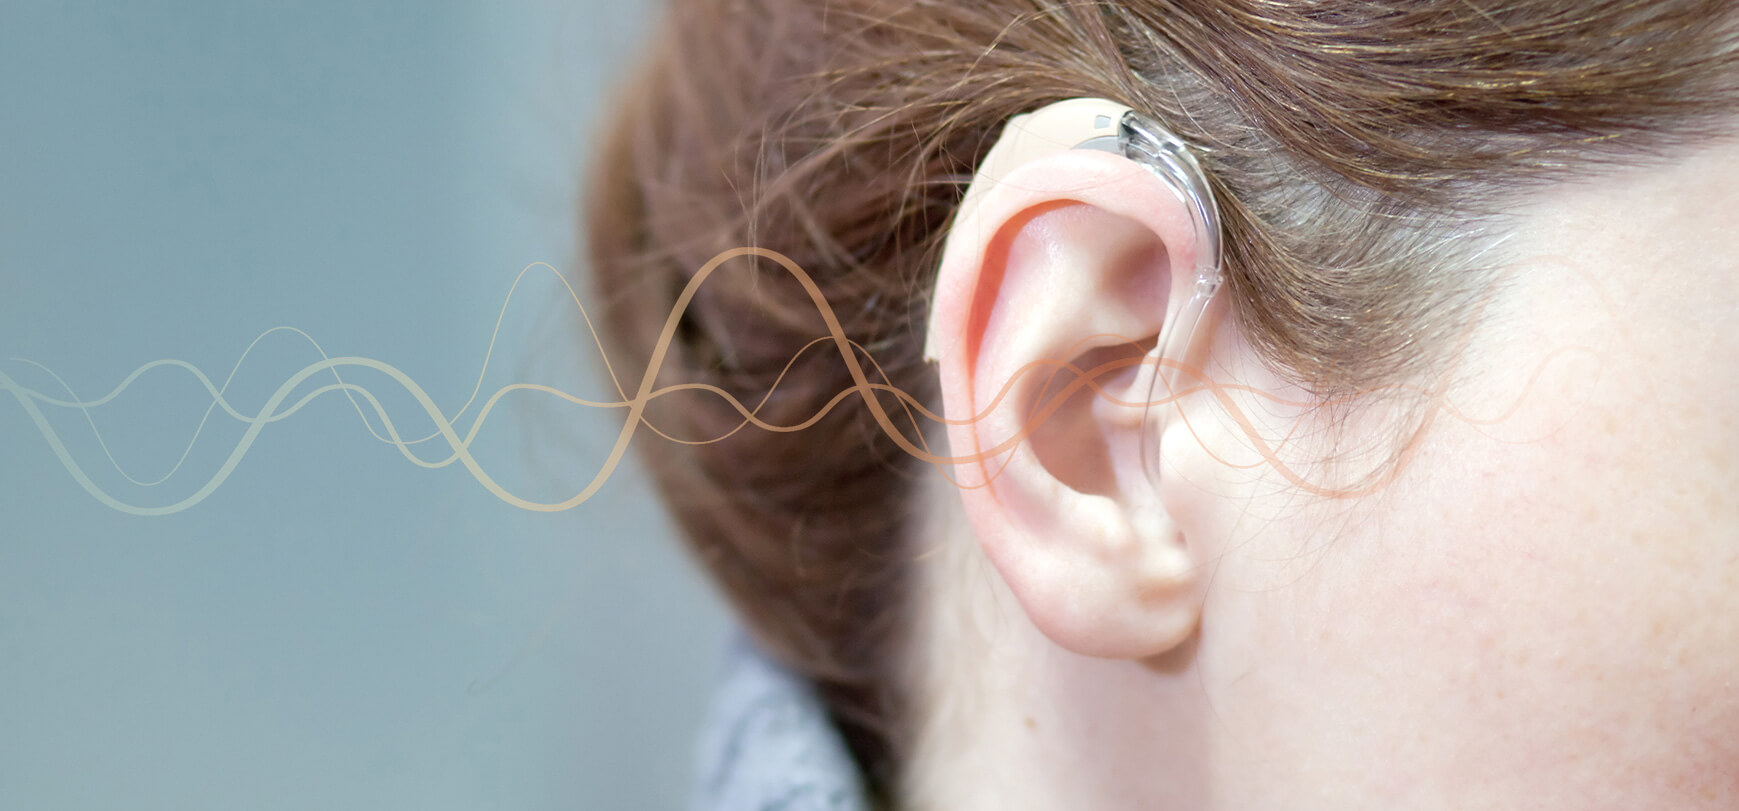 Six Tips for Getting Used to Your New Hearing Aids